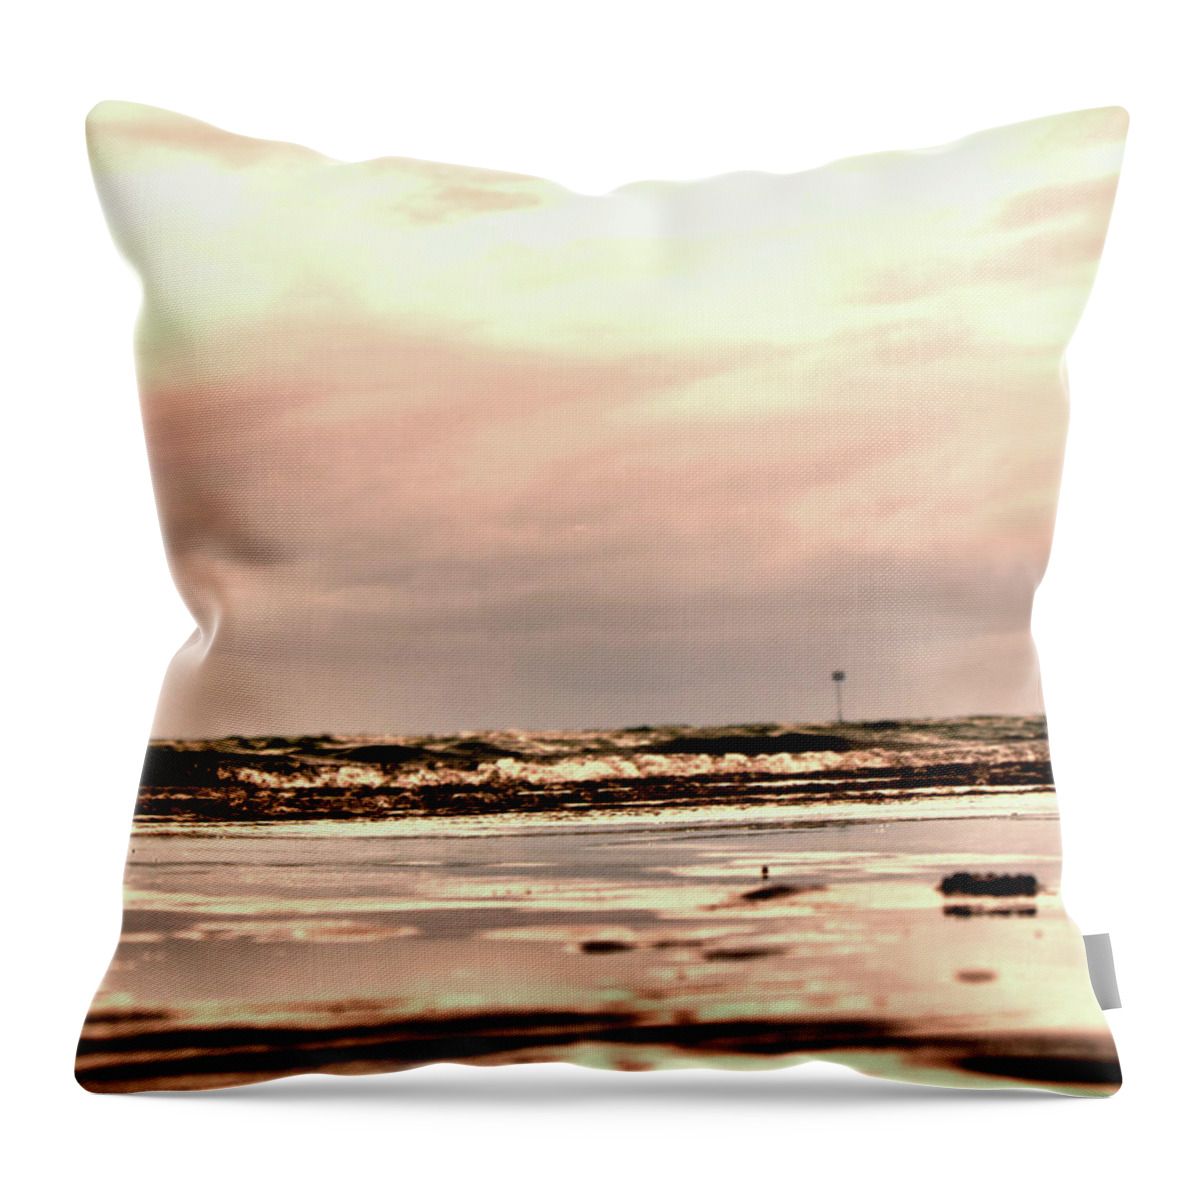 Landscape Throw Pillow featuring the photograph Silver Shine Beach by Michael Blaine